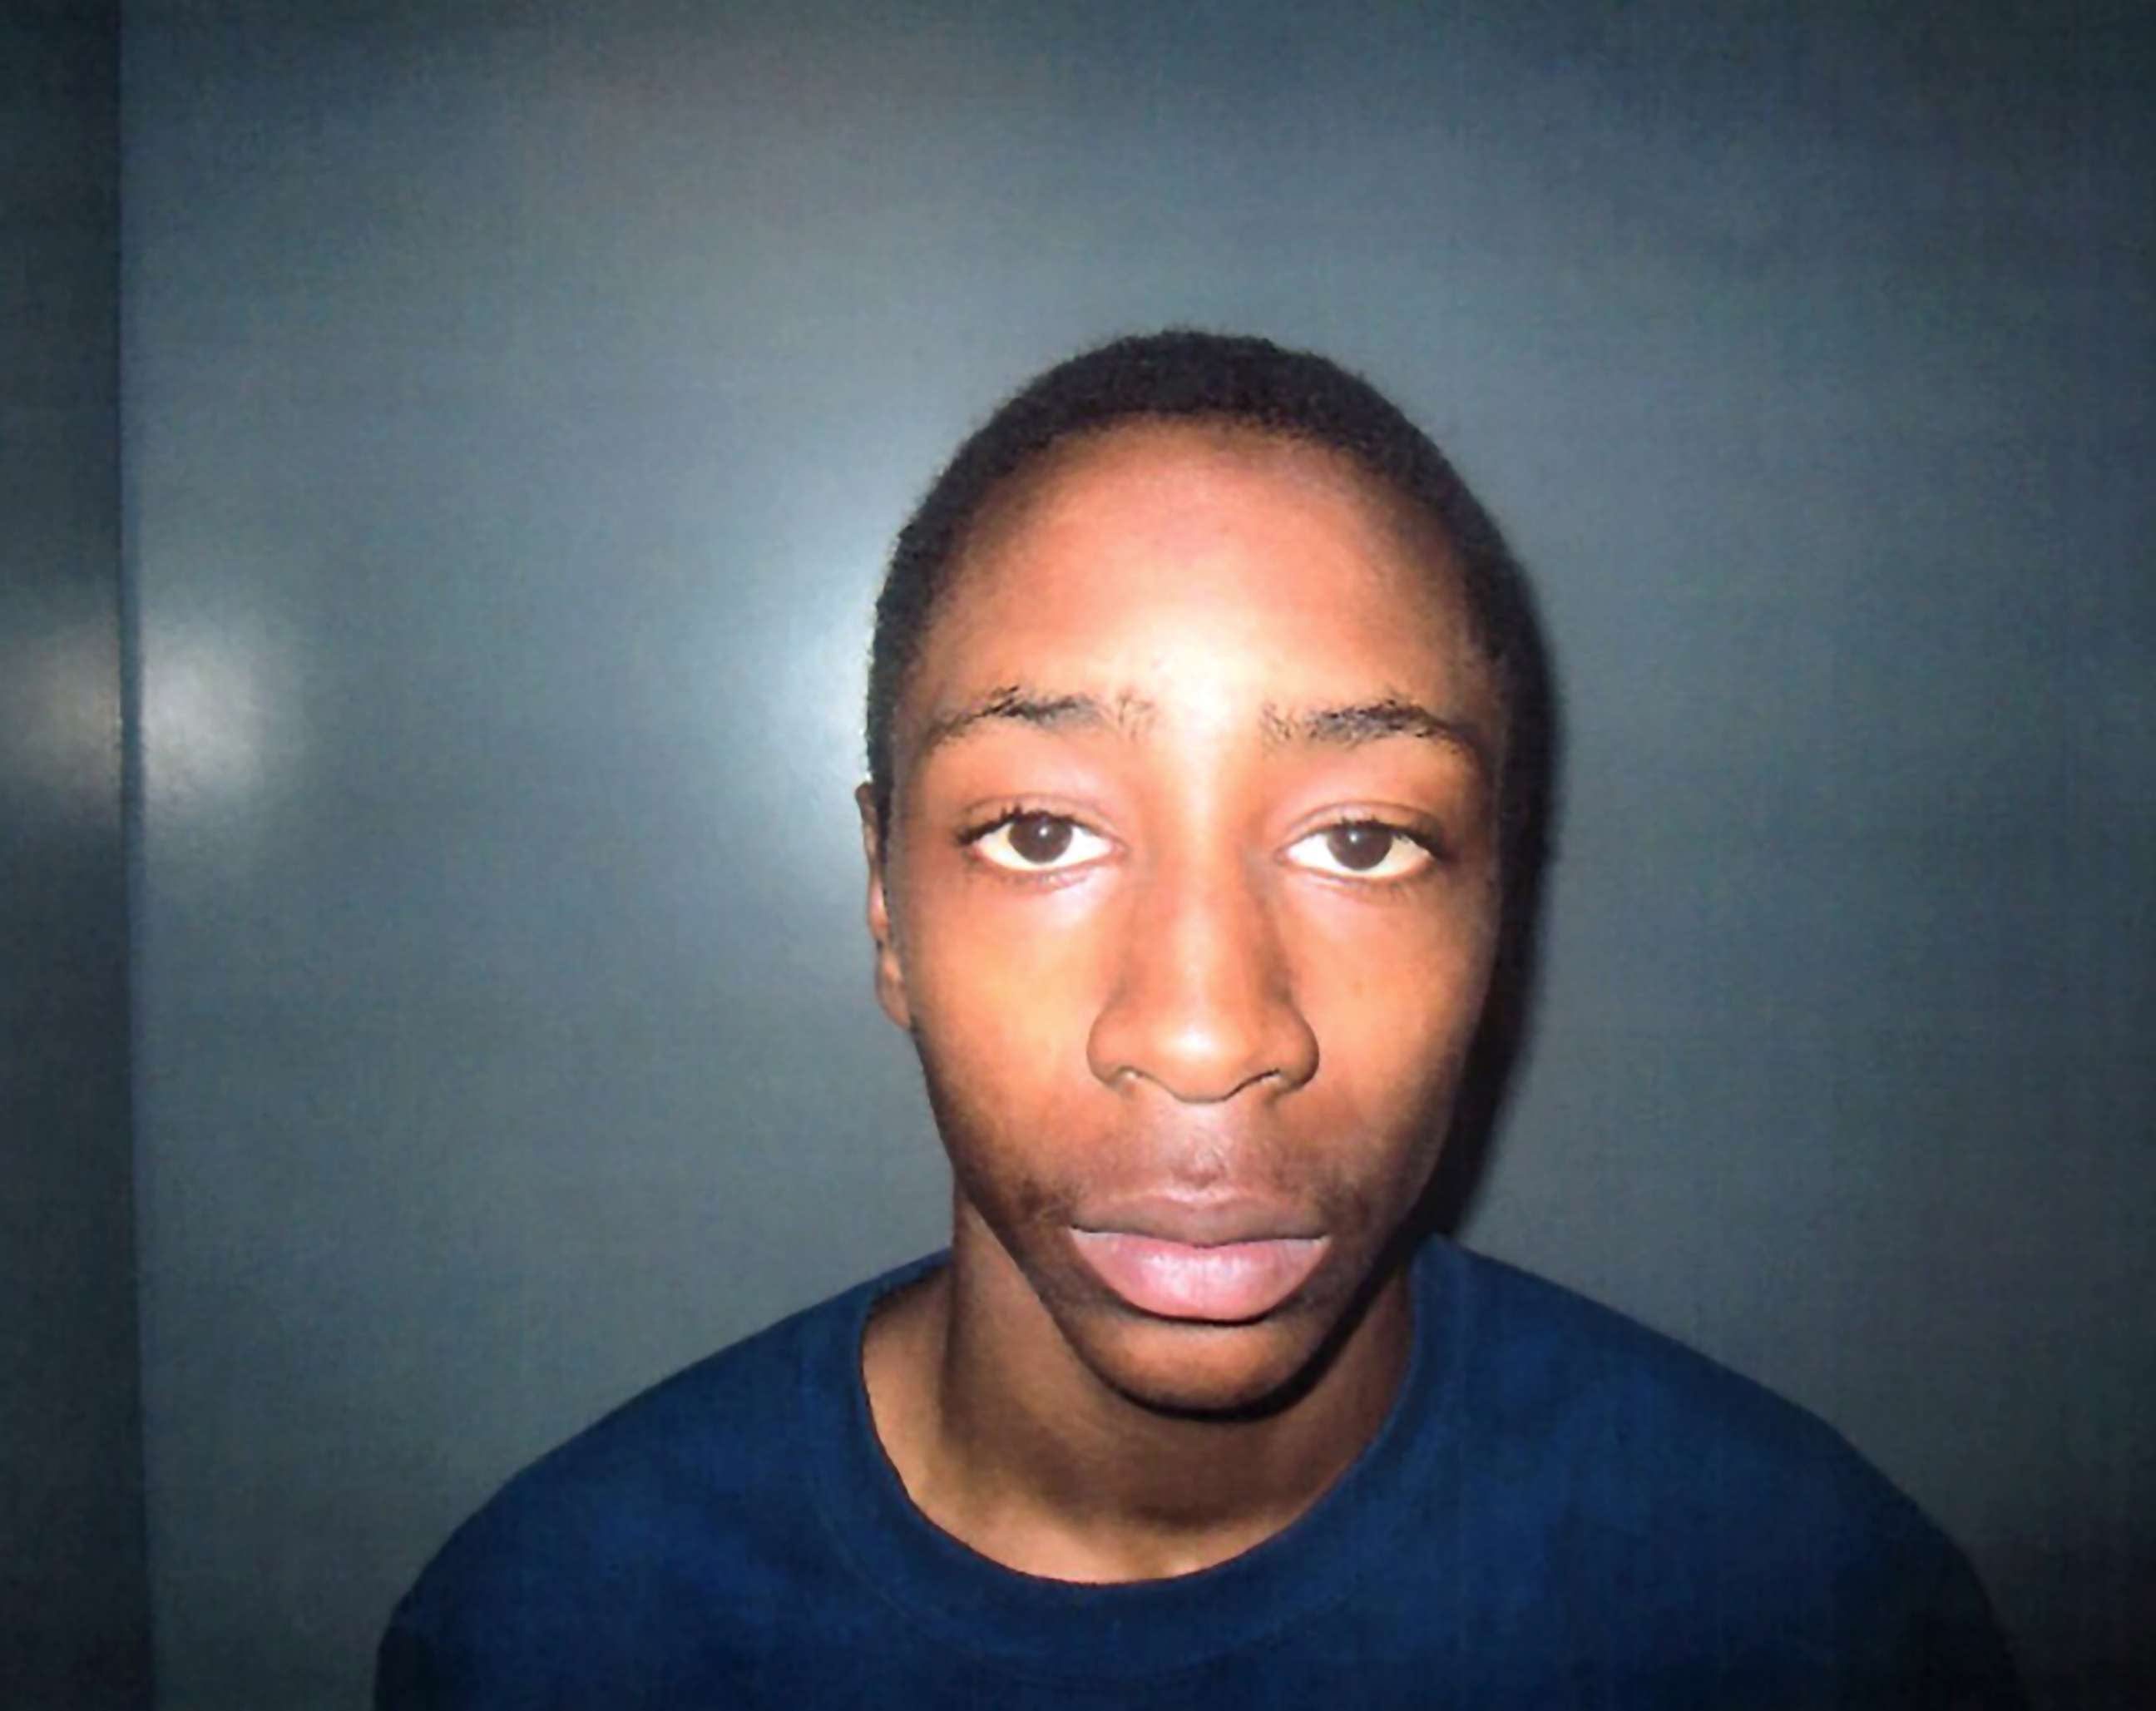 PHOTO: Tai Harrell is pictured in this undated photo released by Clarksville Police Department.